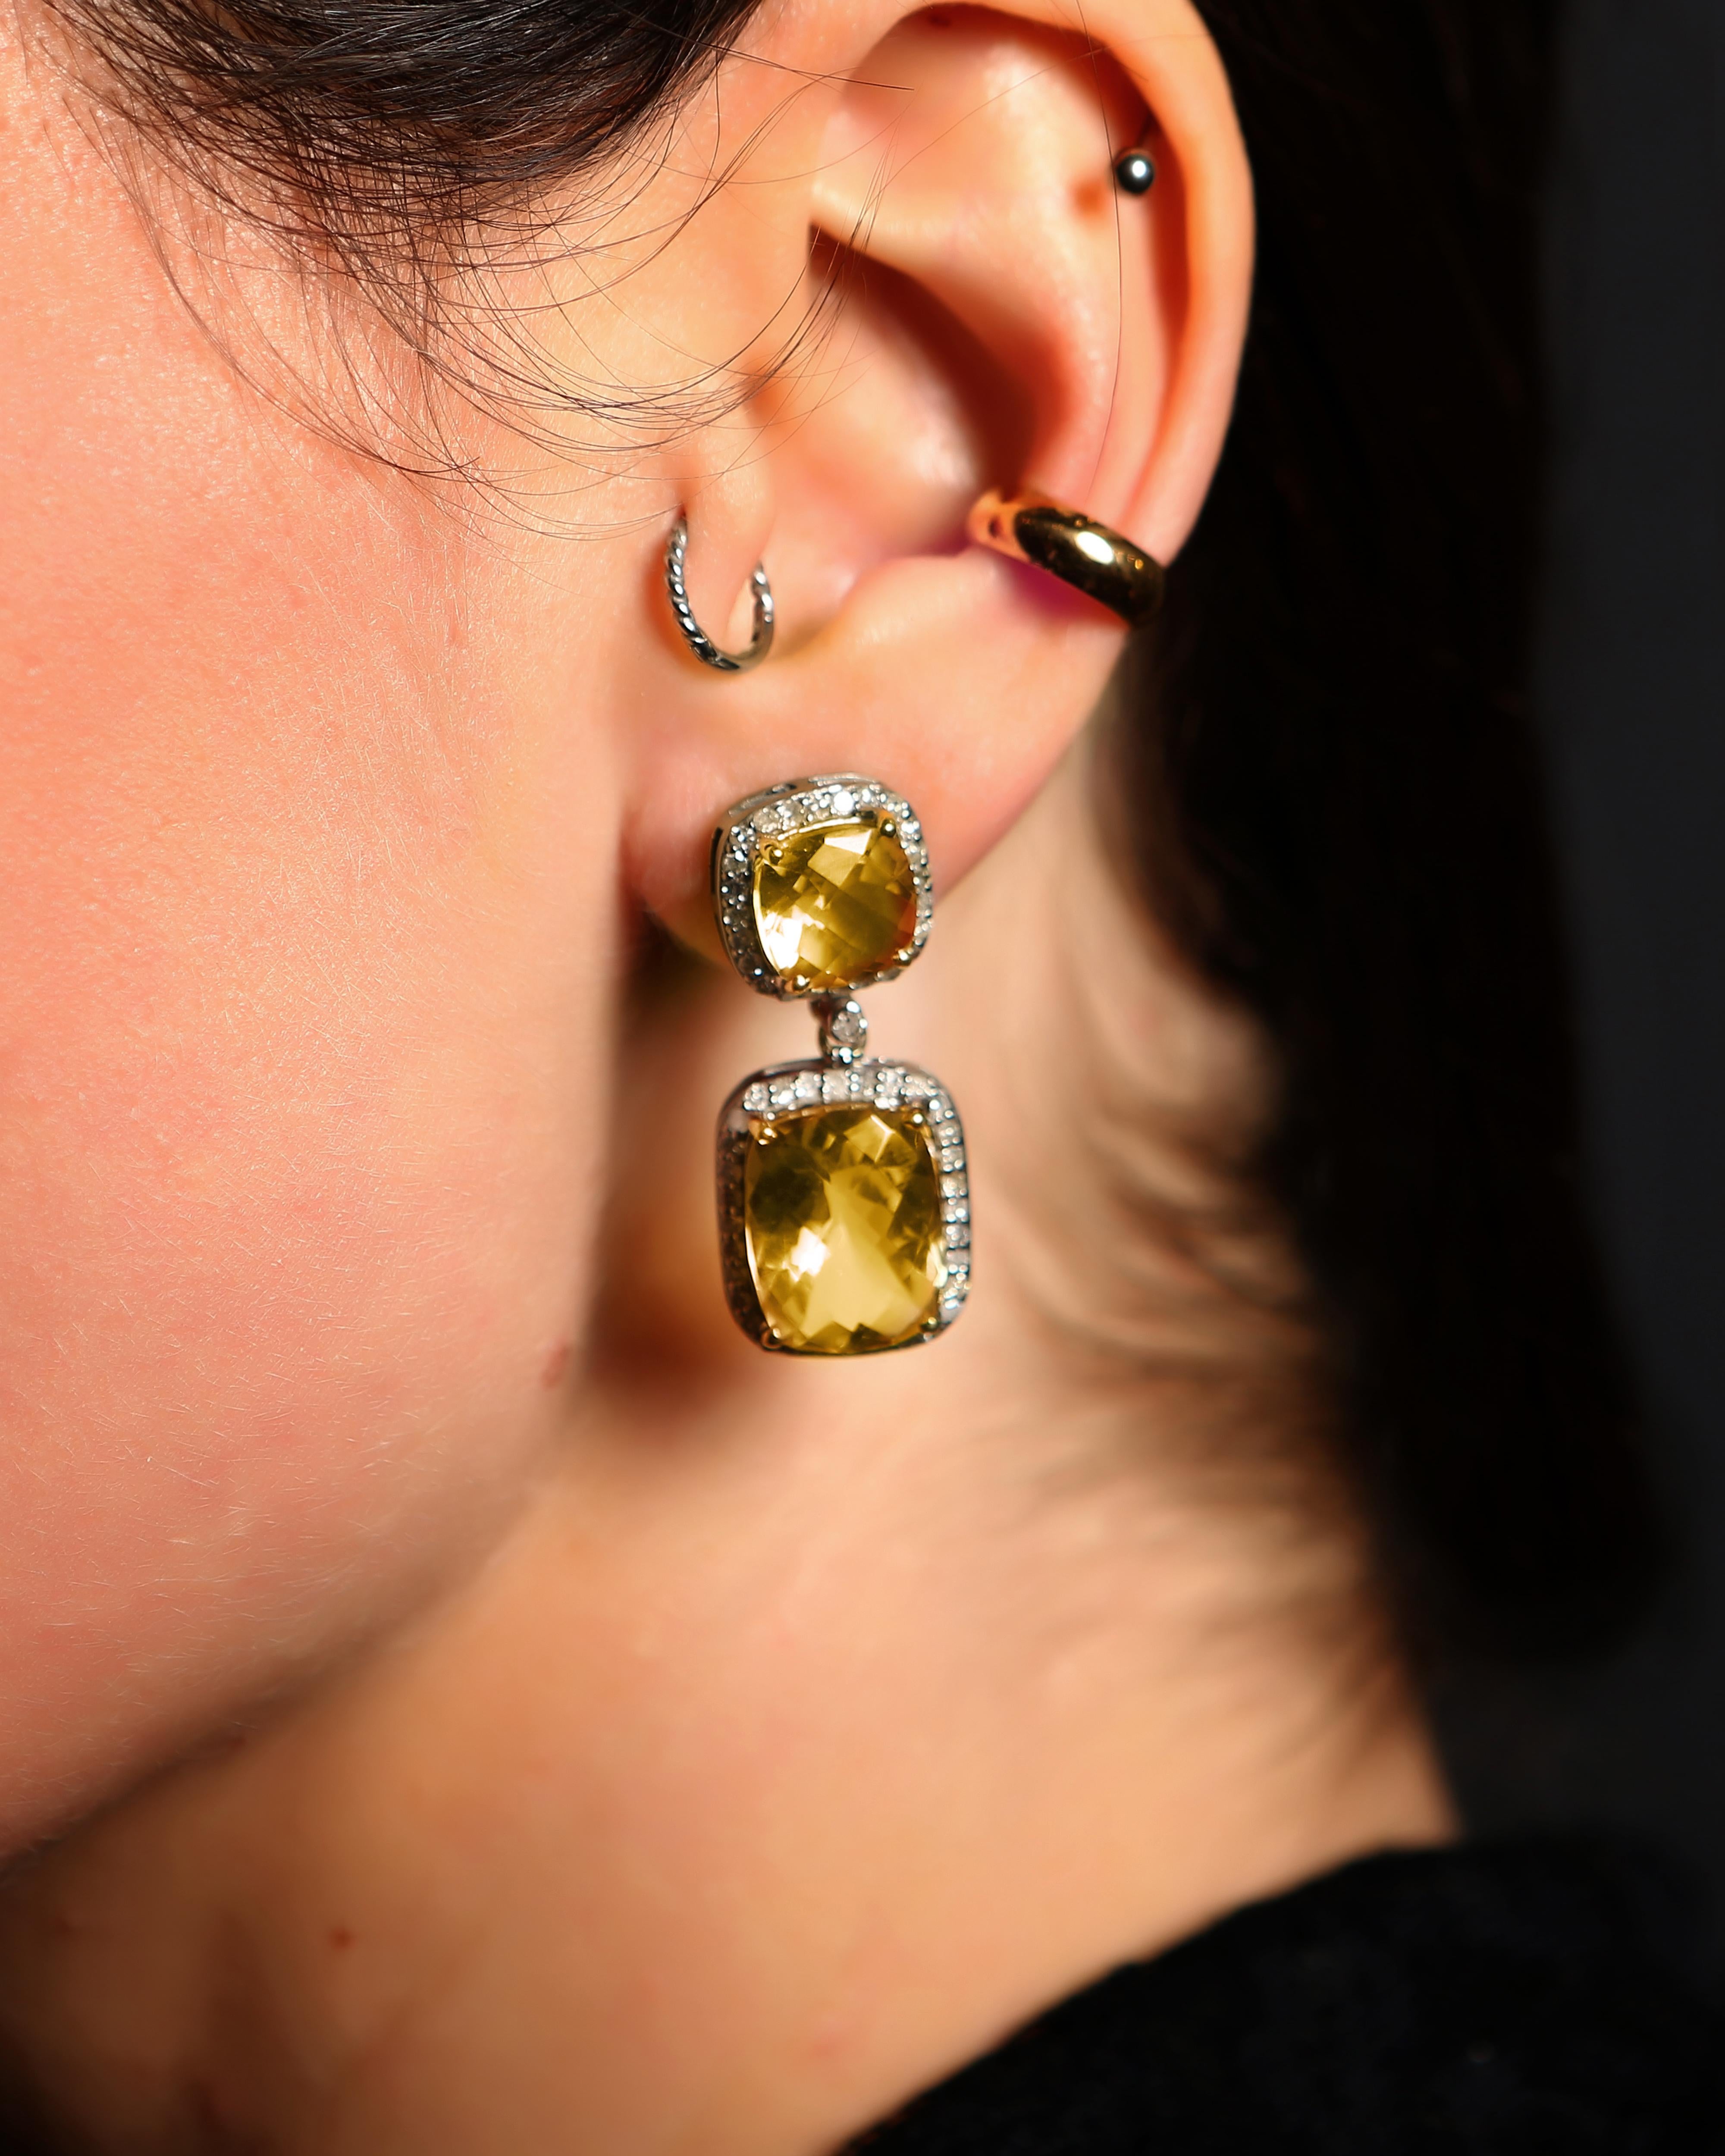 Set with the most beautiful citrine stones outlined with diamonds, these earrings are so classic, versatile & fabulous.

2.98 grams 14kt gold; 6.4 grams silver; 1.47 carat diamonds; 19.69 carat citrine.

3.4 cm in full length; very light weight for